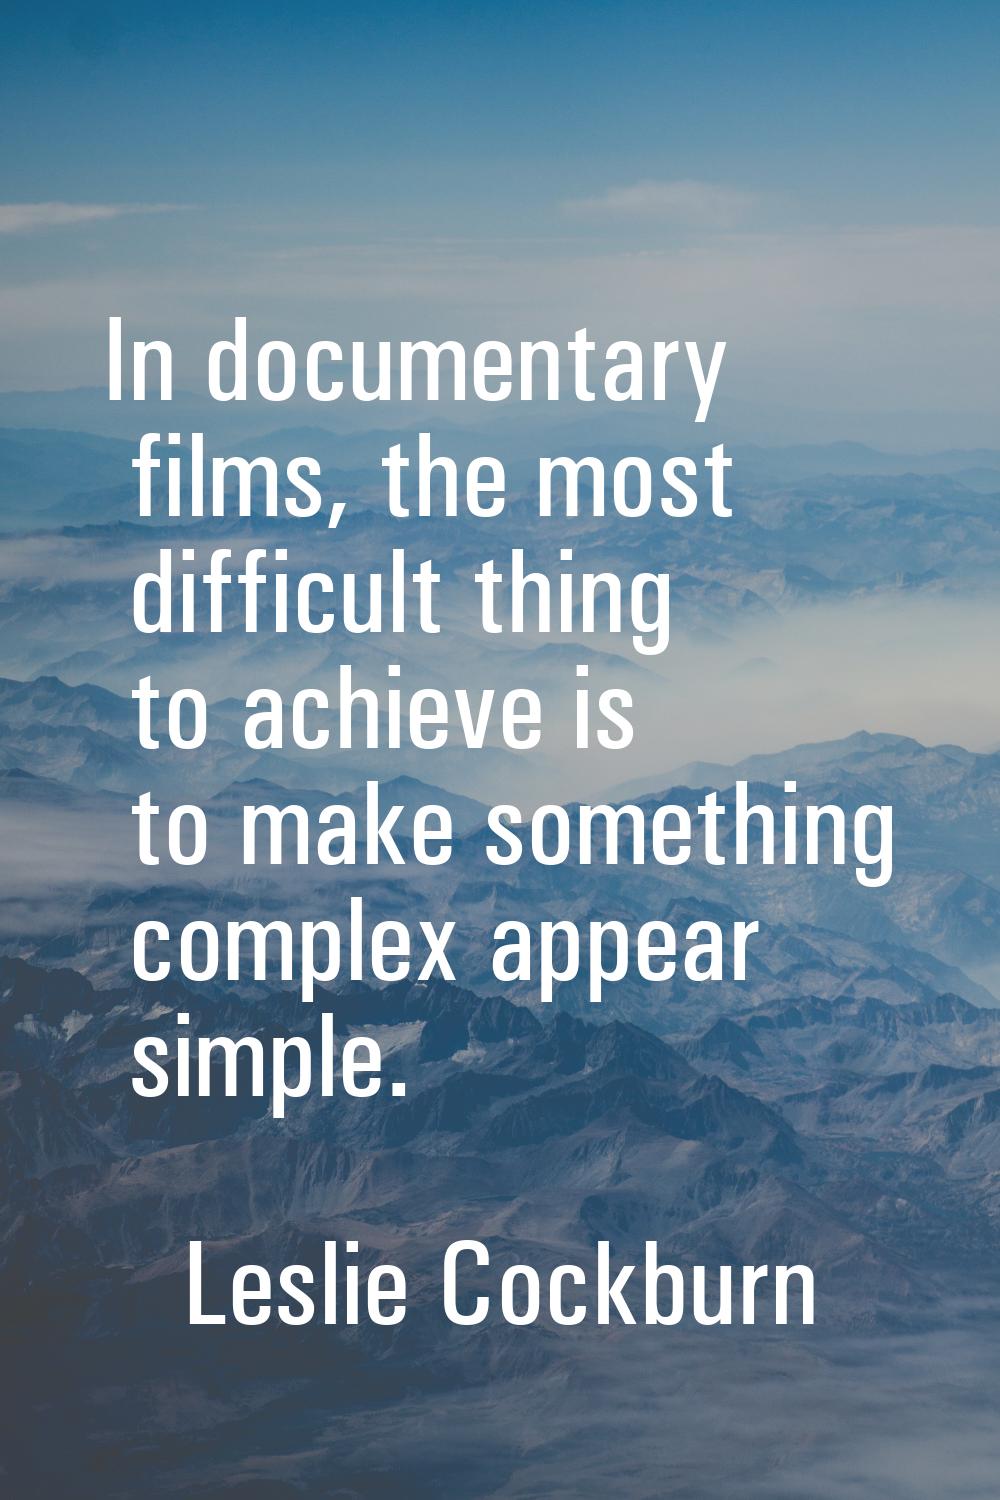 In documentary films, the most difficult thing to achieve is to make something complex appear simpl